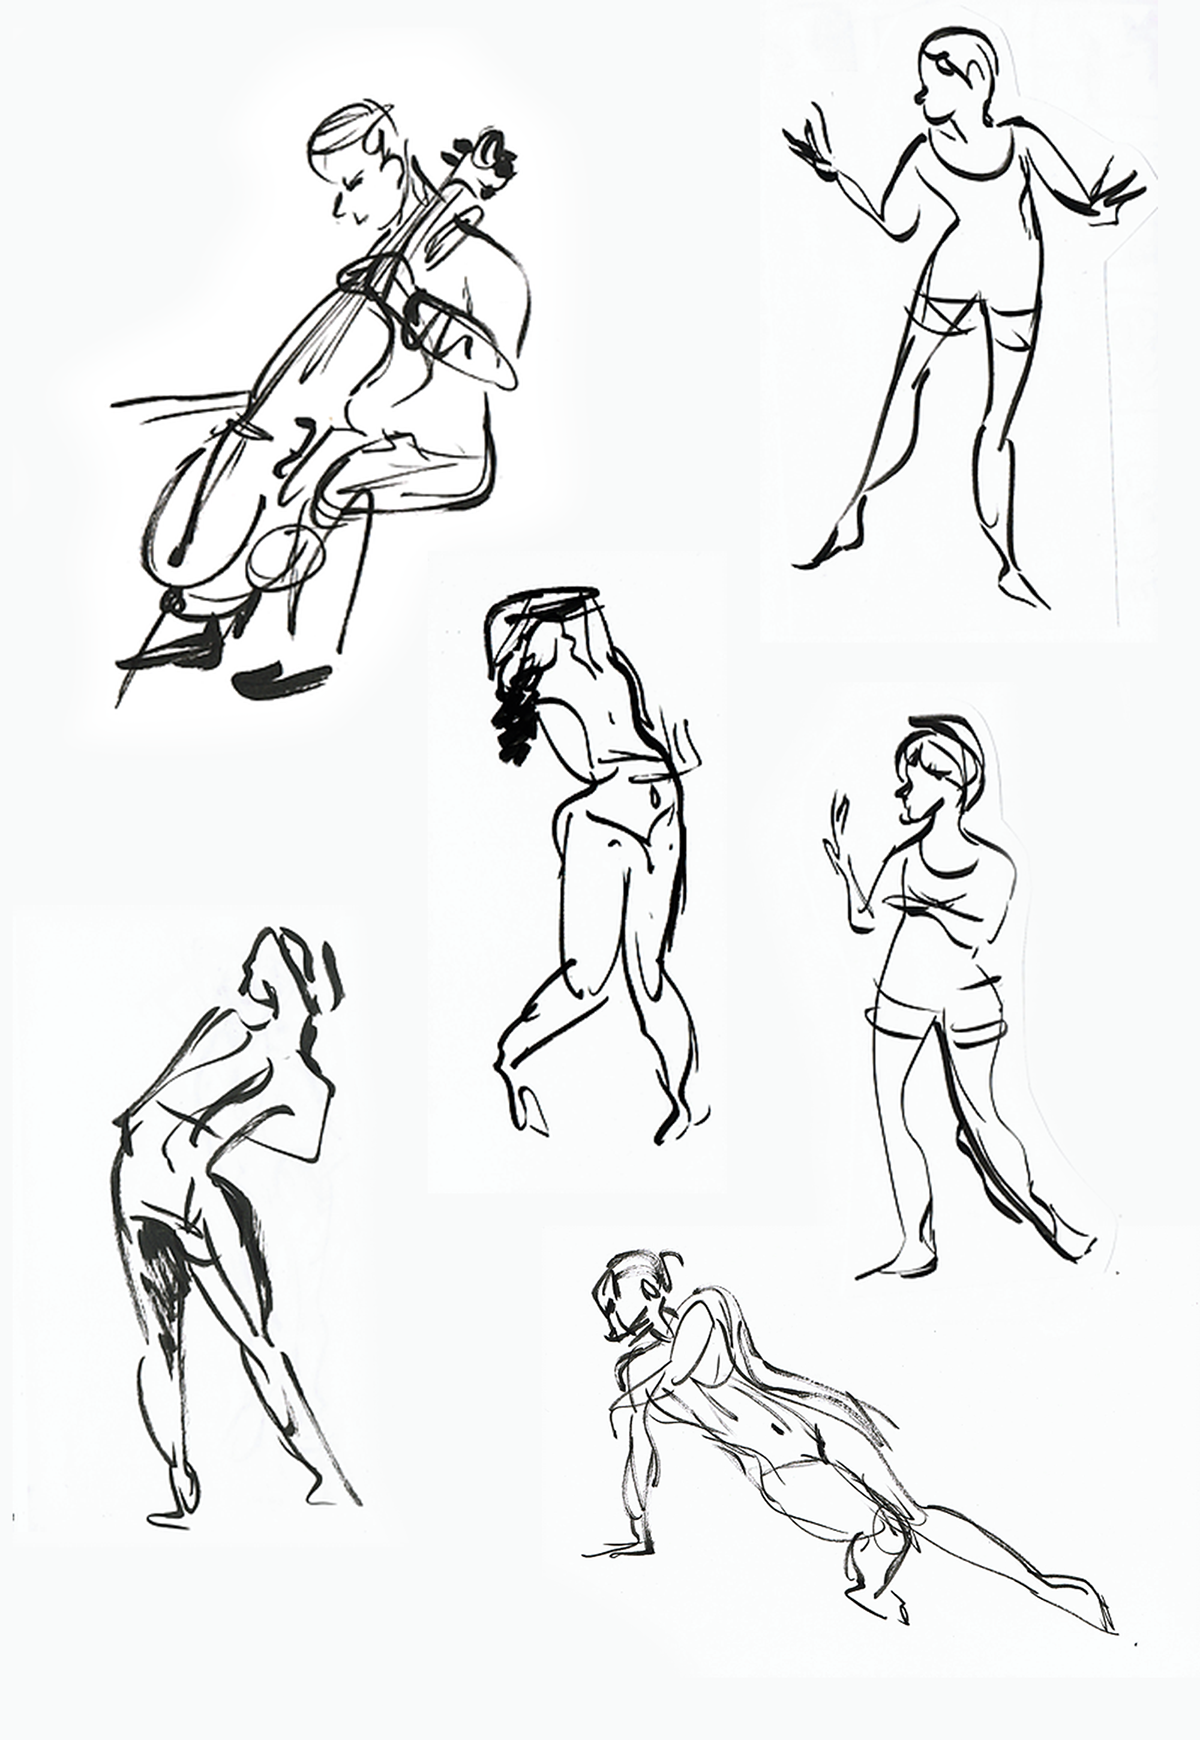 Life drawing ( figure, hands, cats, portraits) on Behance